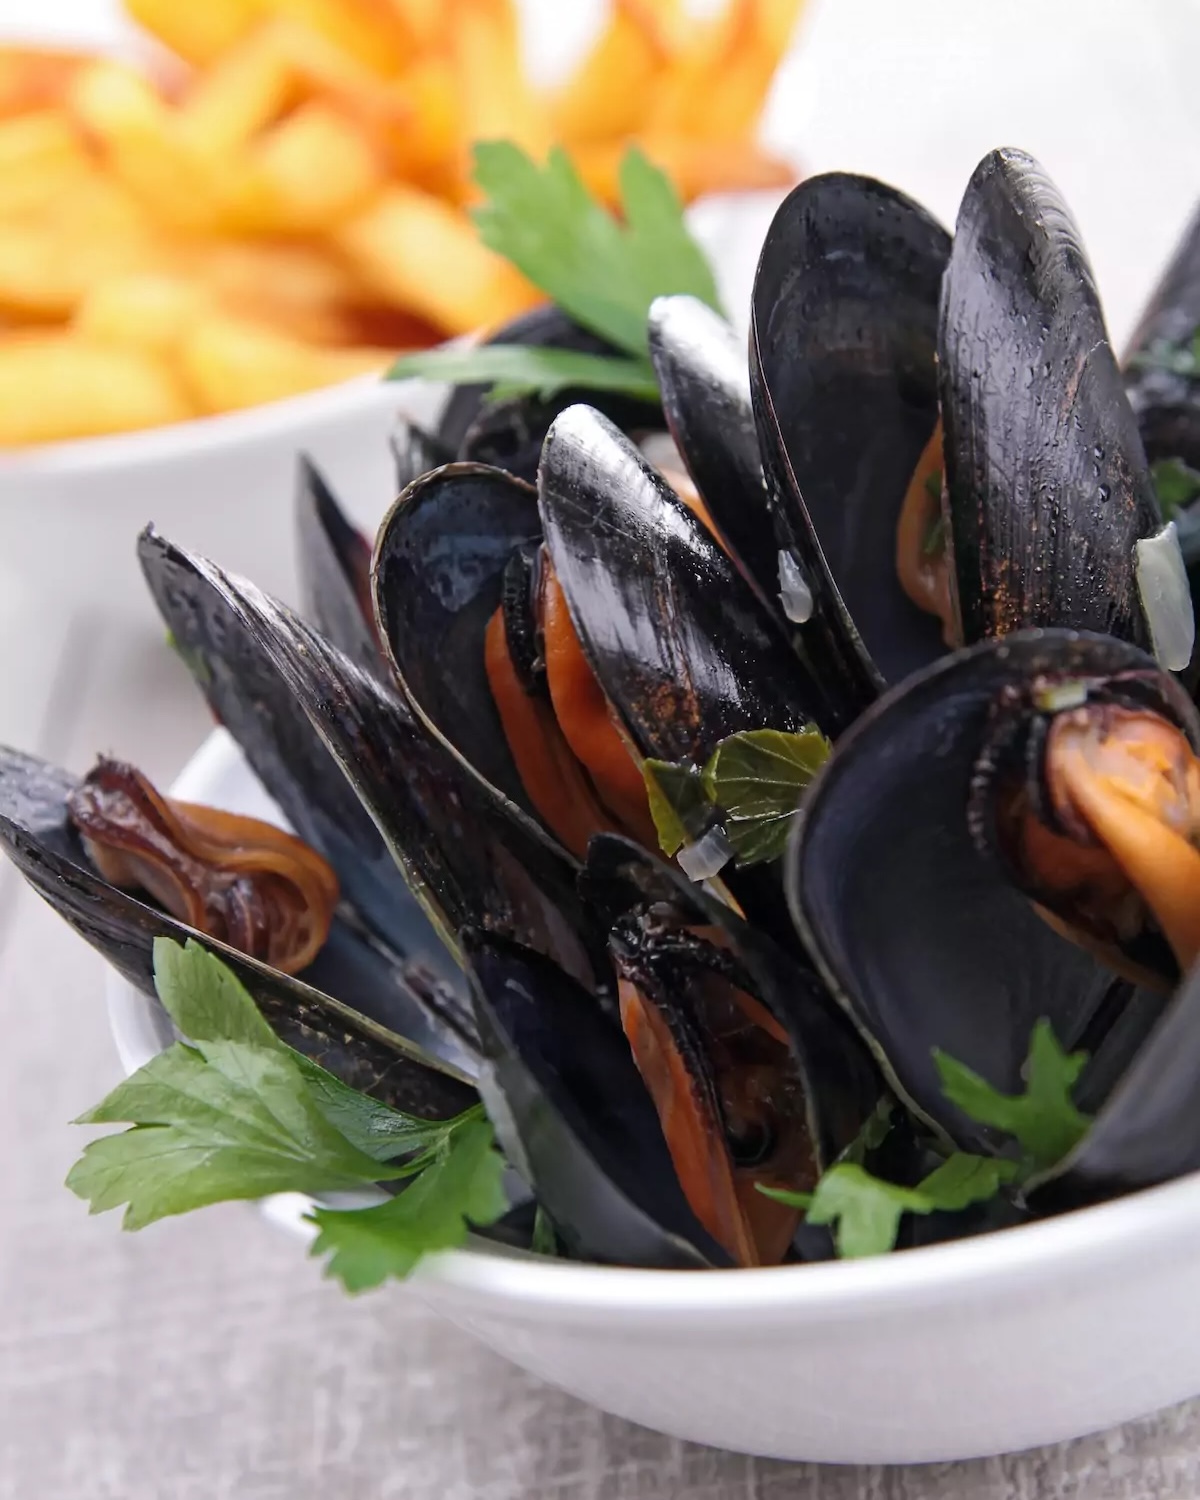 Moules frites ©Chatham172 Shutterstock